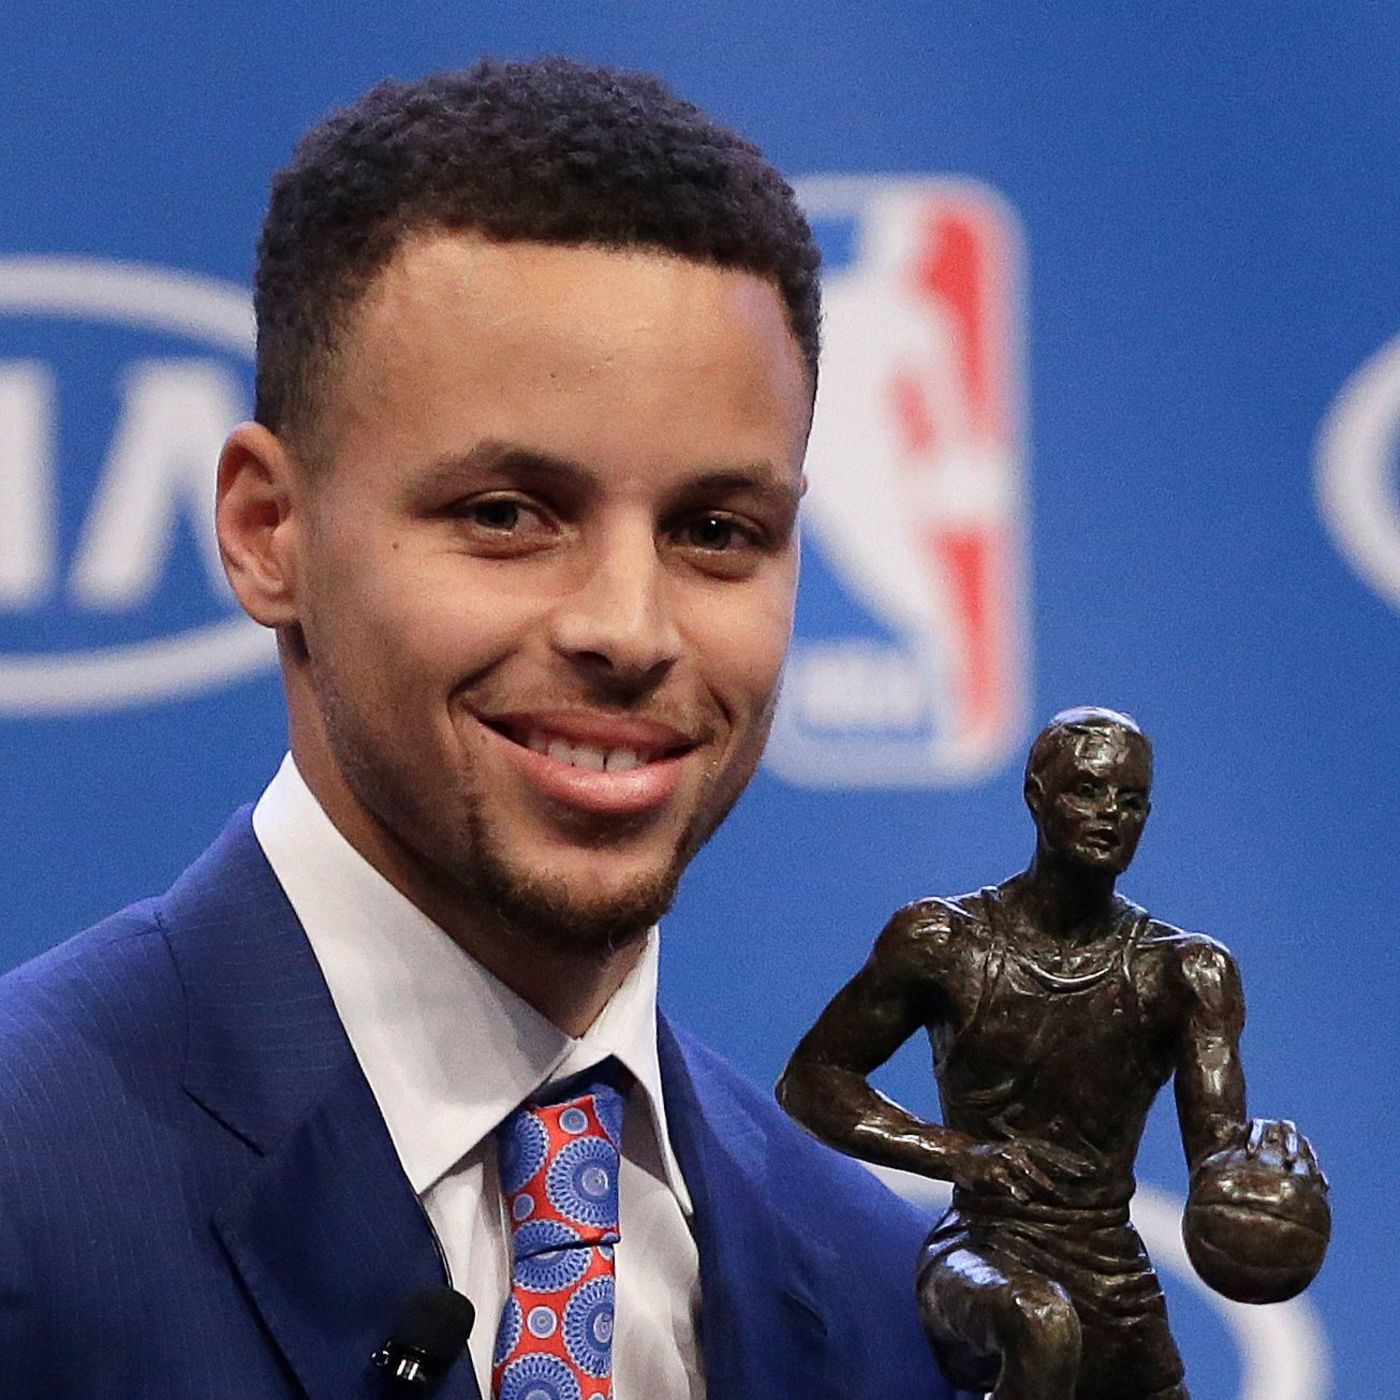 Stephen Curry talks about the MVP award and the season